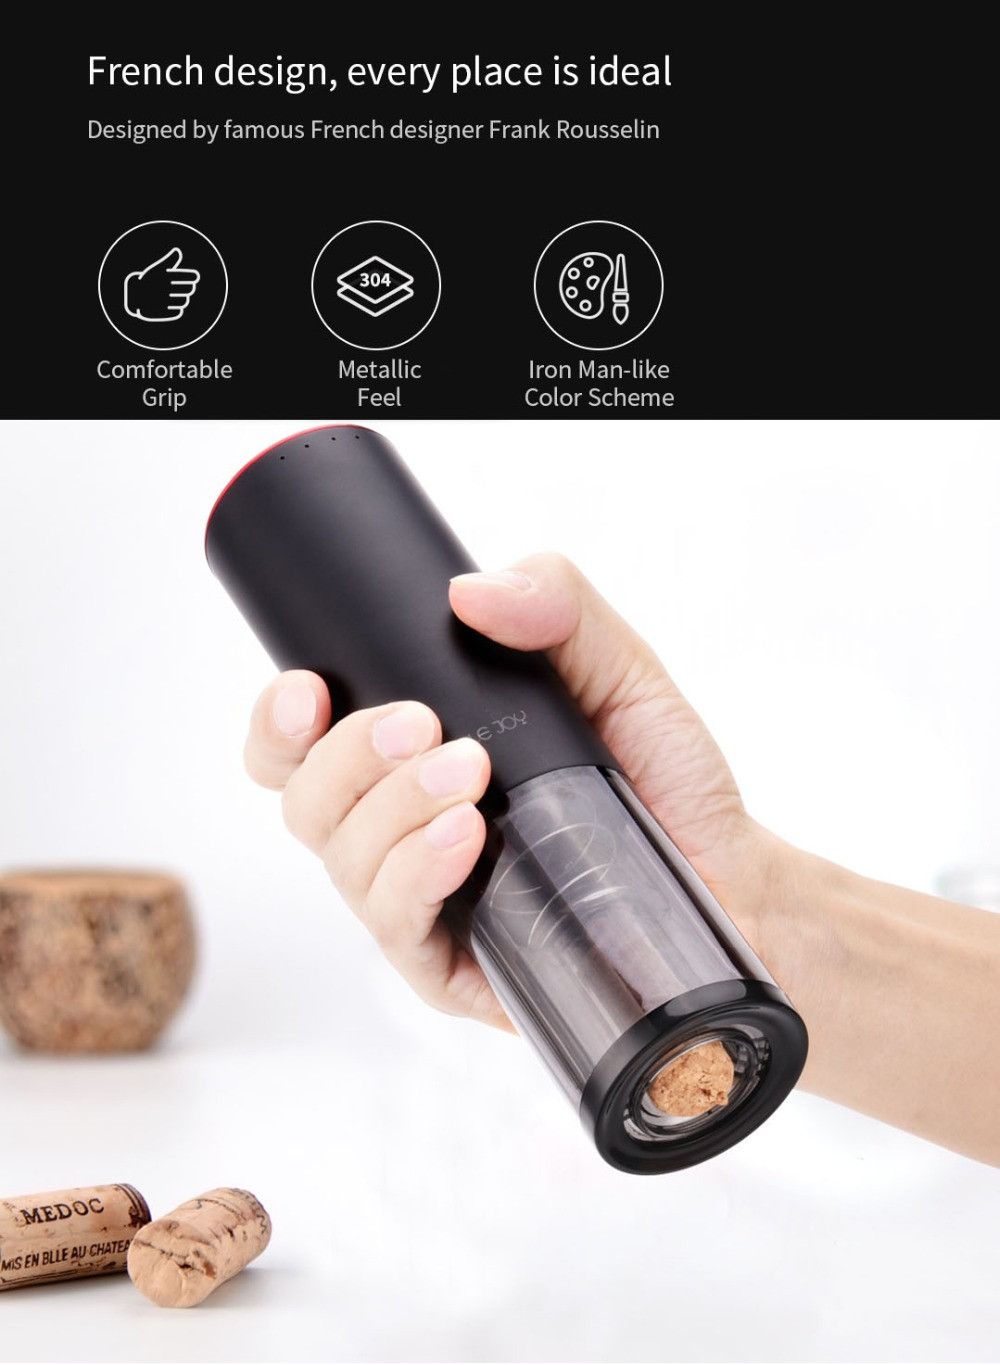 Circle-Joy-Smart-Automatic-Electric-Bottle-Opener-USB-Charging-Home-Kitchen-Bar-W-ine-Opening-Tool-1547336